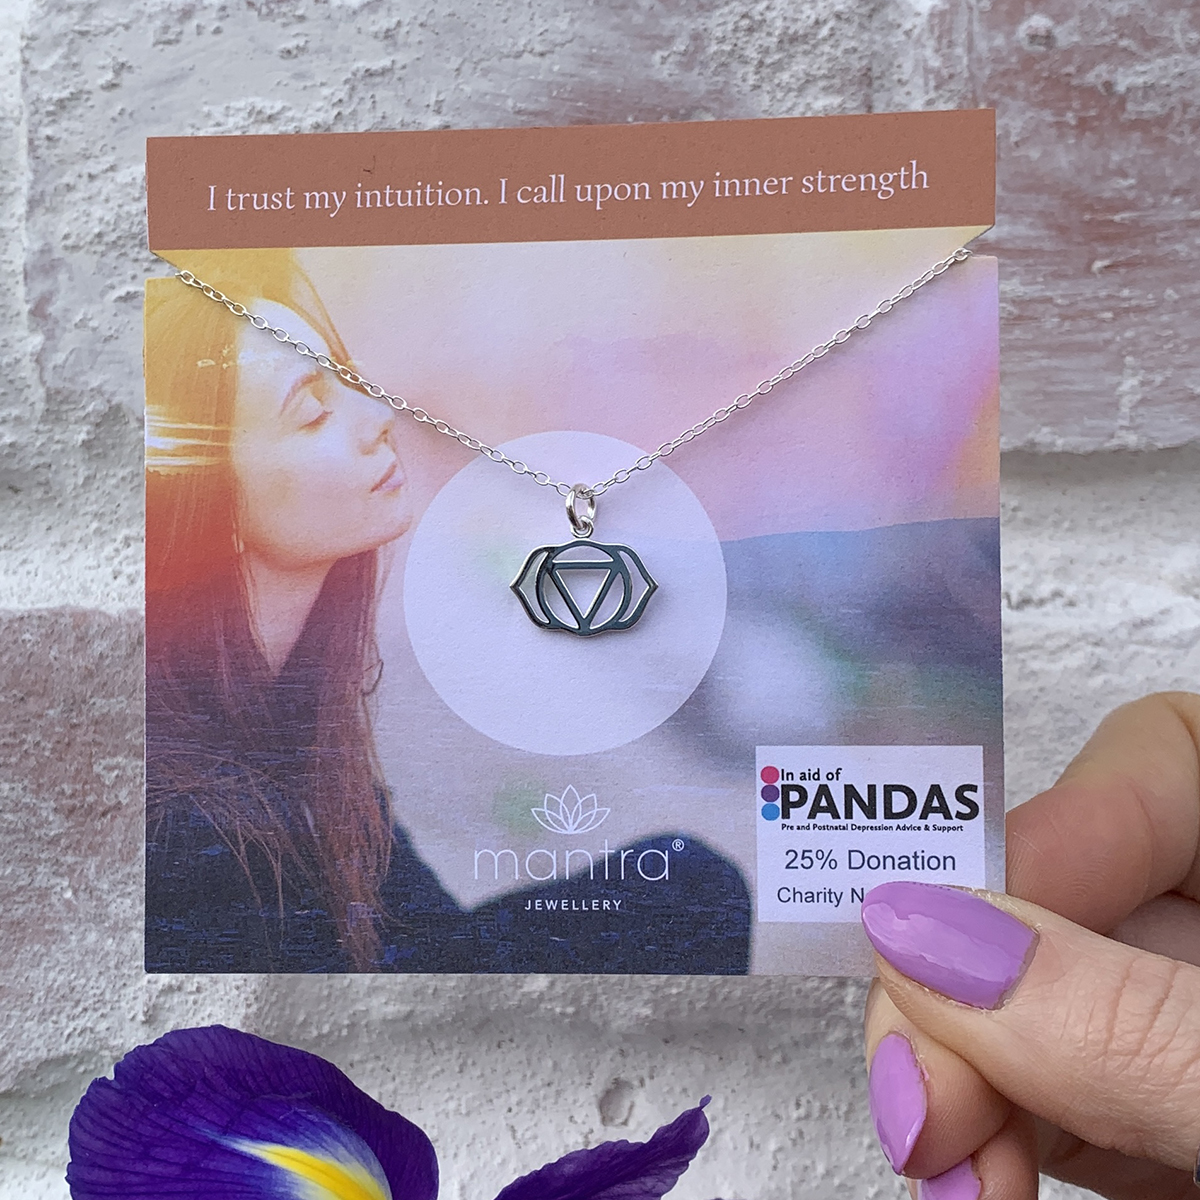 mantra PANDAS charity necklace